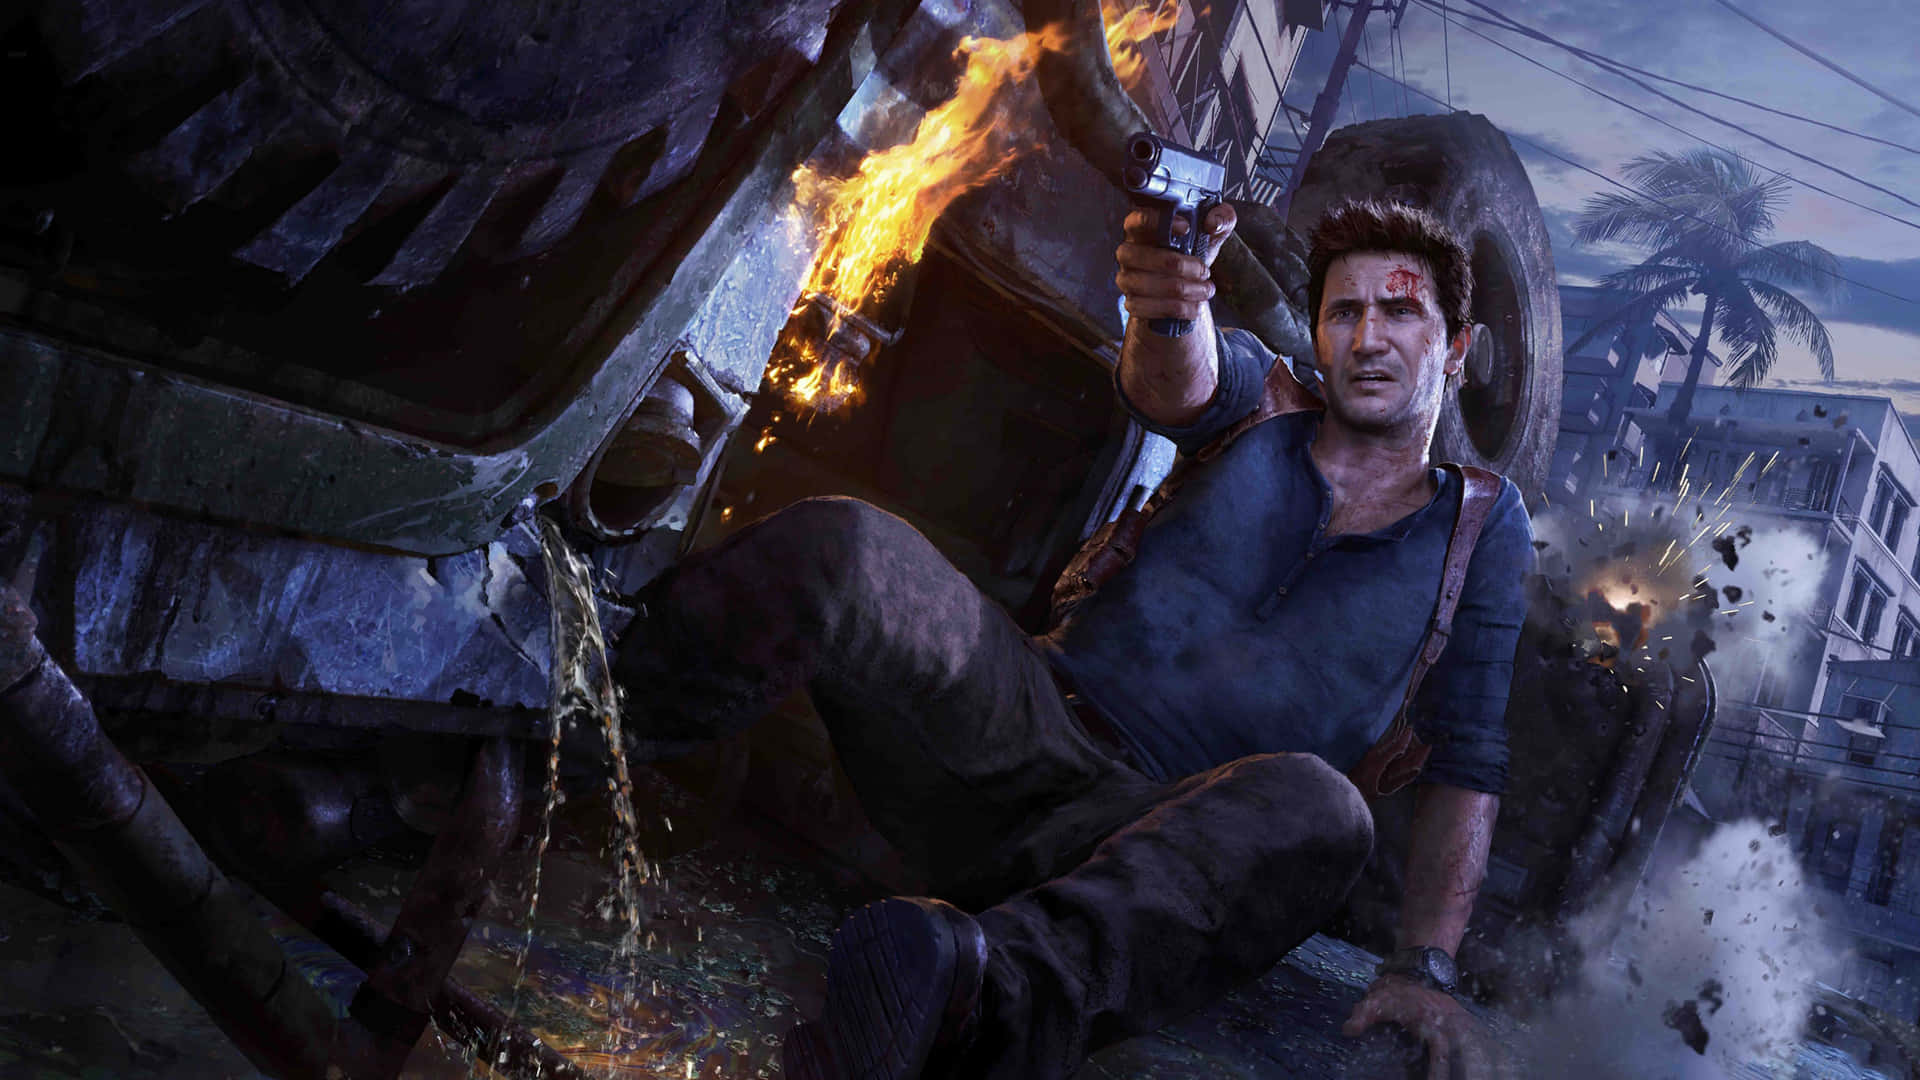 Uncharted 4: A Thief's End - PC - 4K Gameplay 